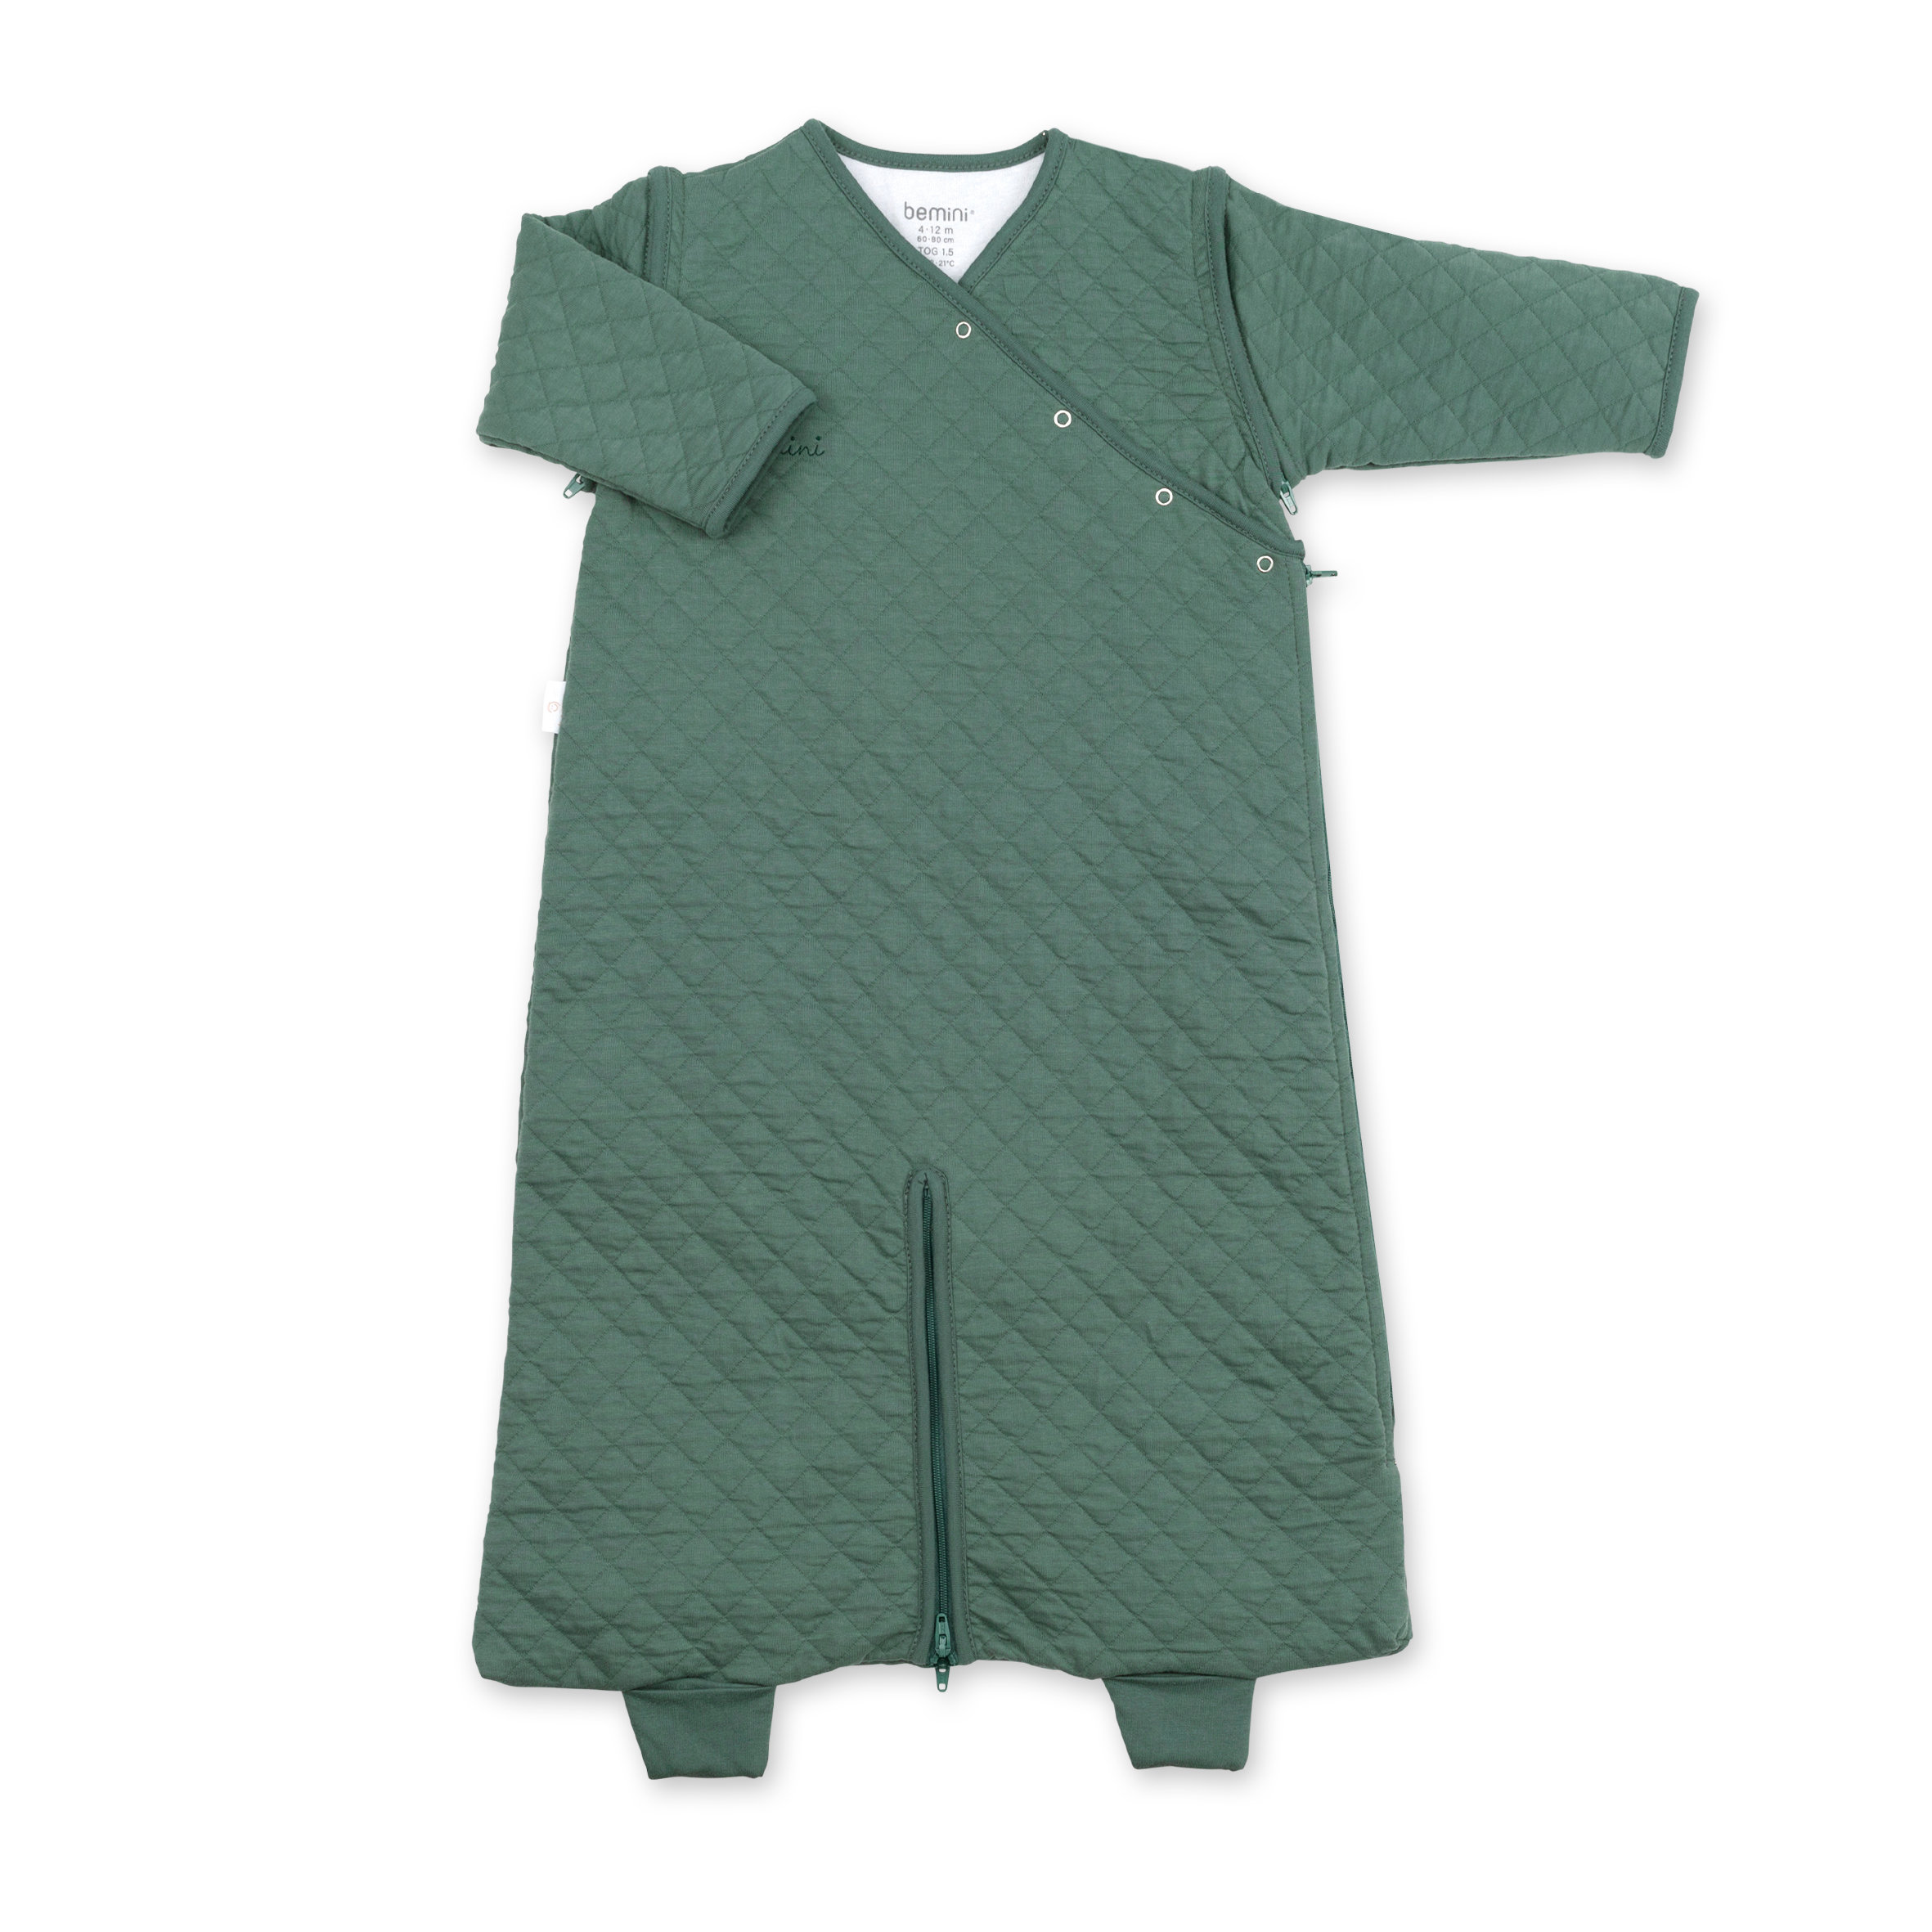 MAGIC BAG Pady quilted jersey 4-12m QUILT Green tog 1.5